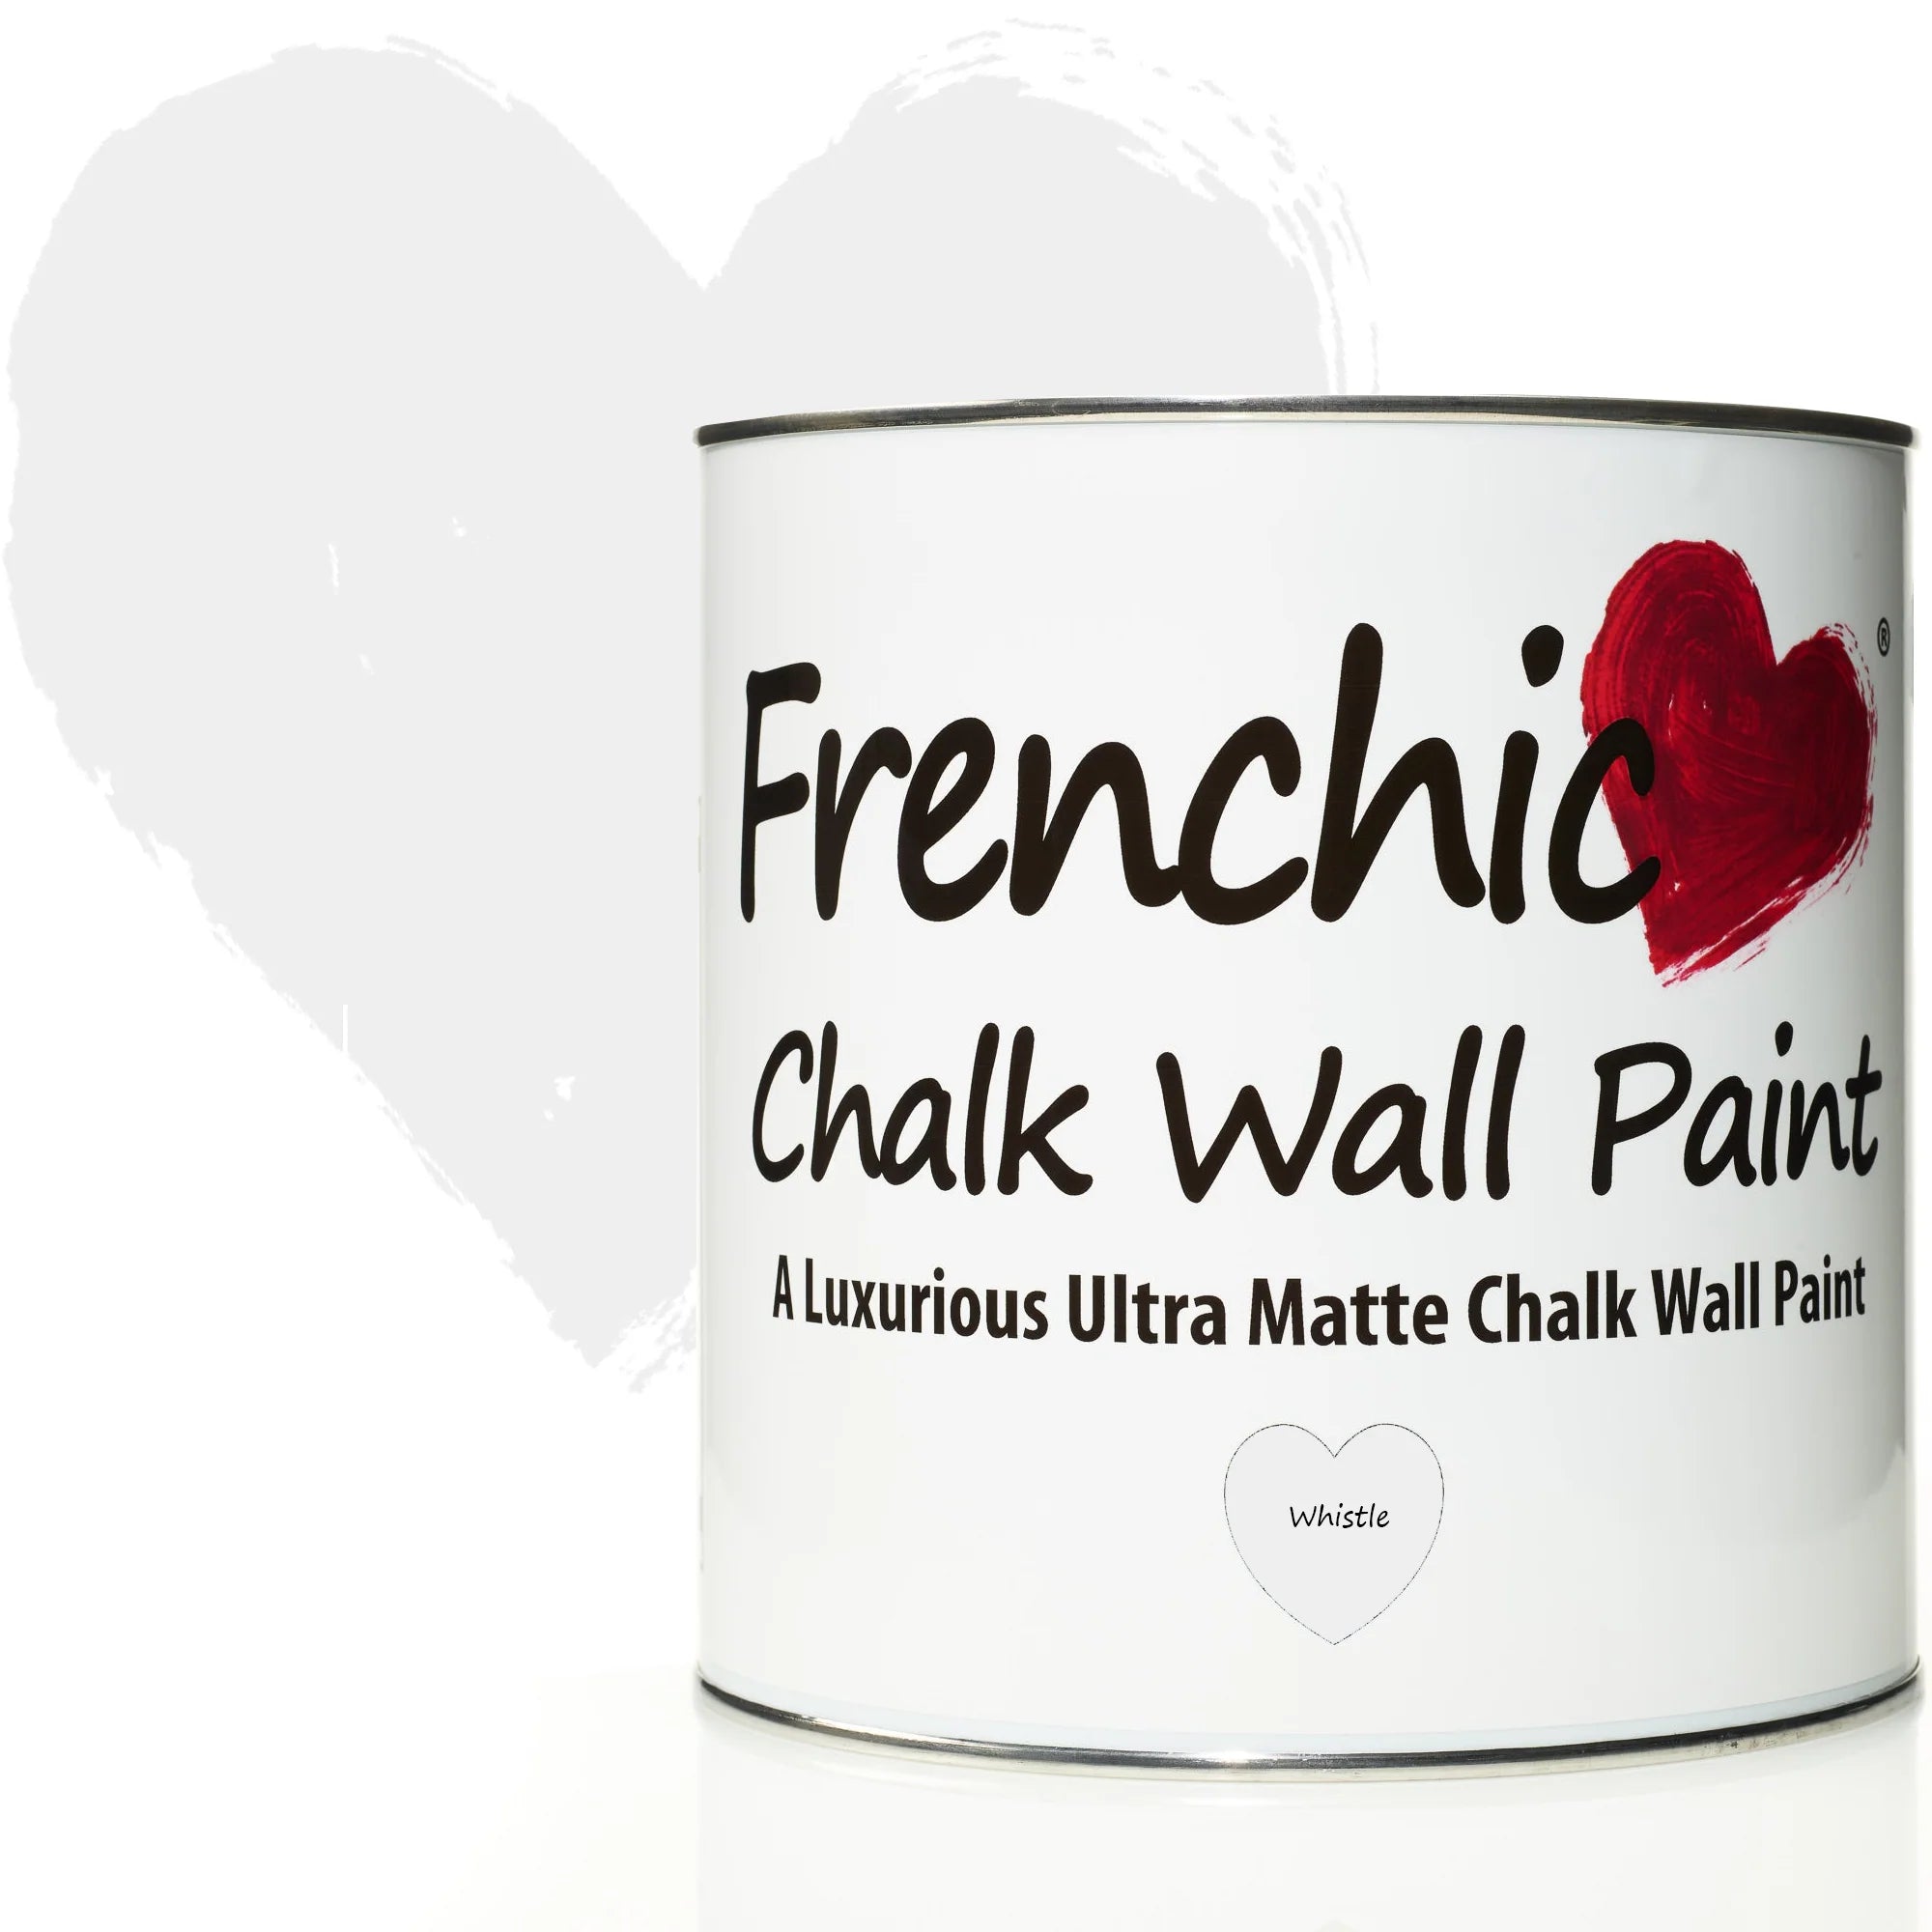 Frenchic Paint Whistle Wall Paint 2.5L Frenchic Paint Chalk Wall Paint Range by Weirs of Baggot Street Irelands Largest and most Trusted Stockist of Frenchic Paint. Shop online for Nationwide and Same Day Dublin Delivery